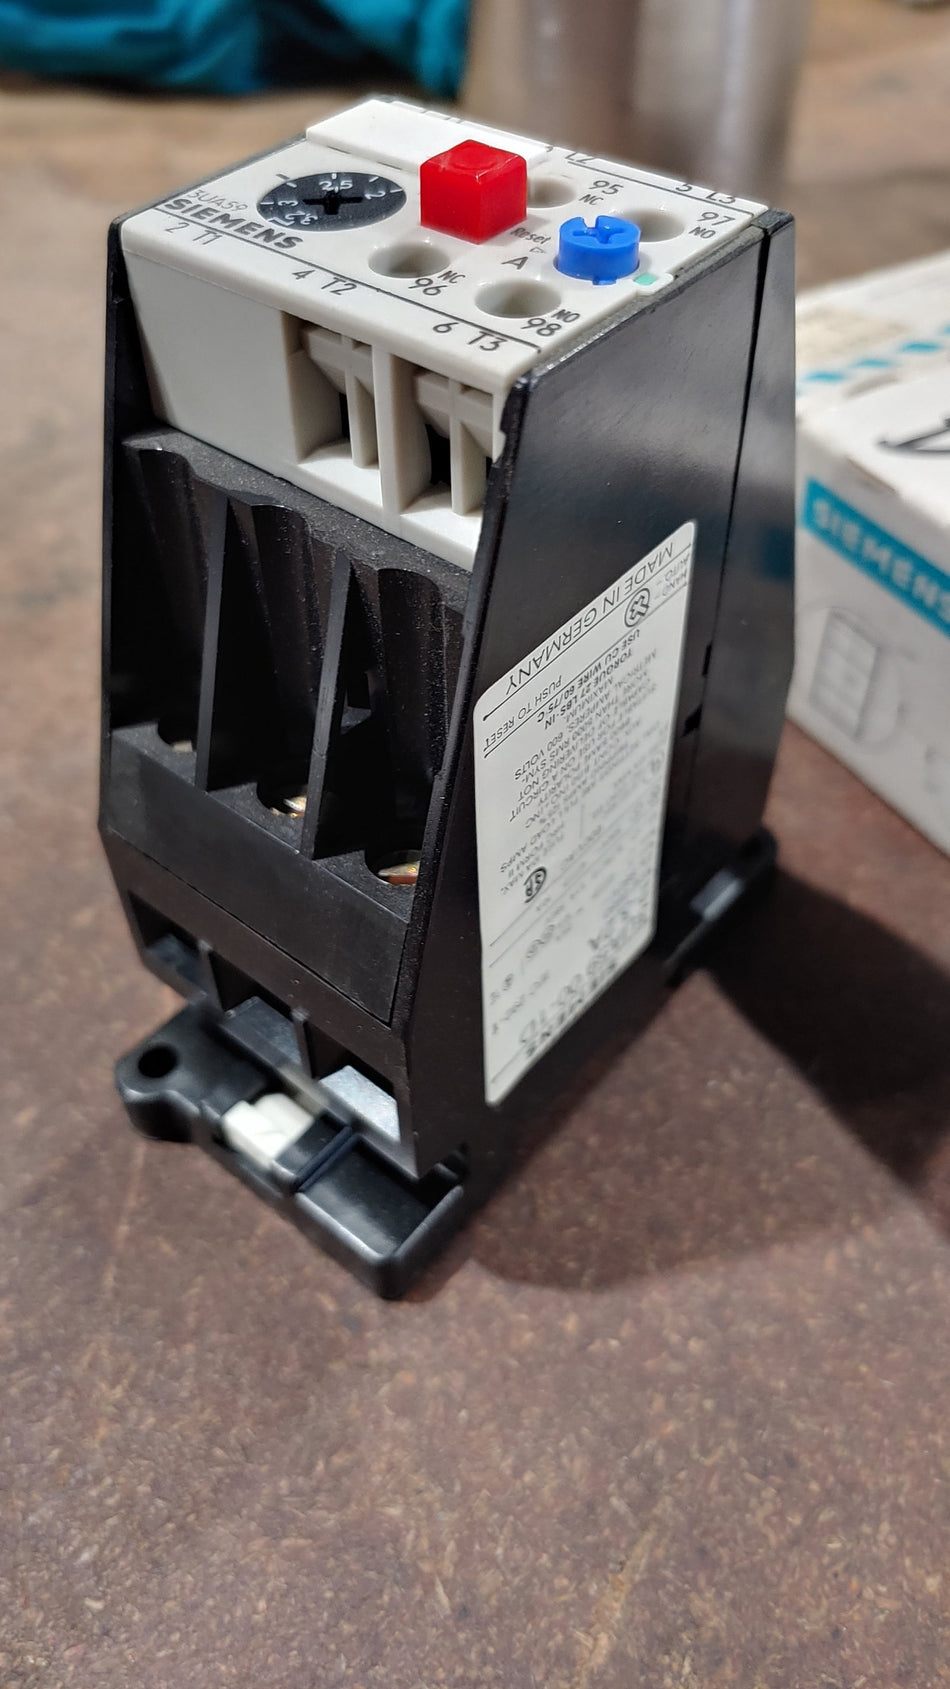 3UA59-00-1D Siemens, overload relay rated for 2-3.2 amps